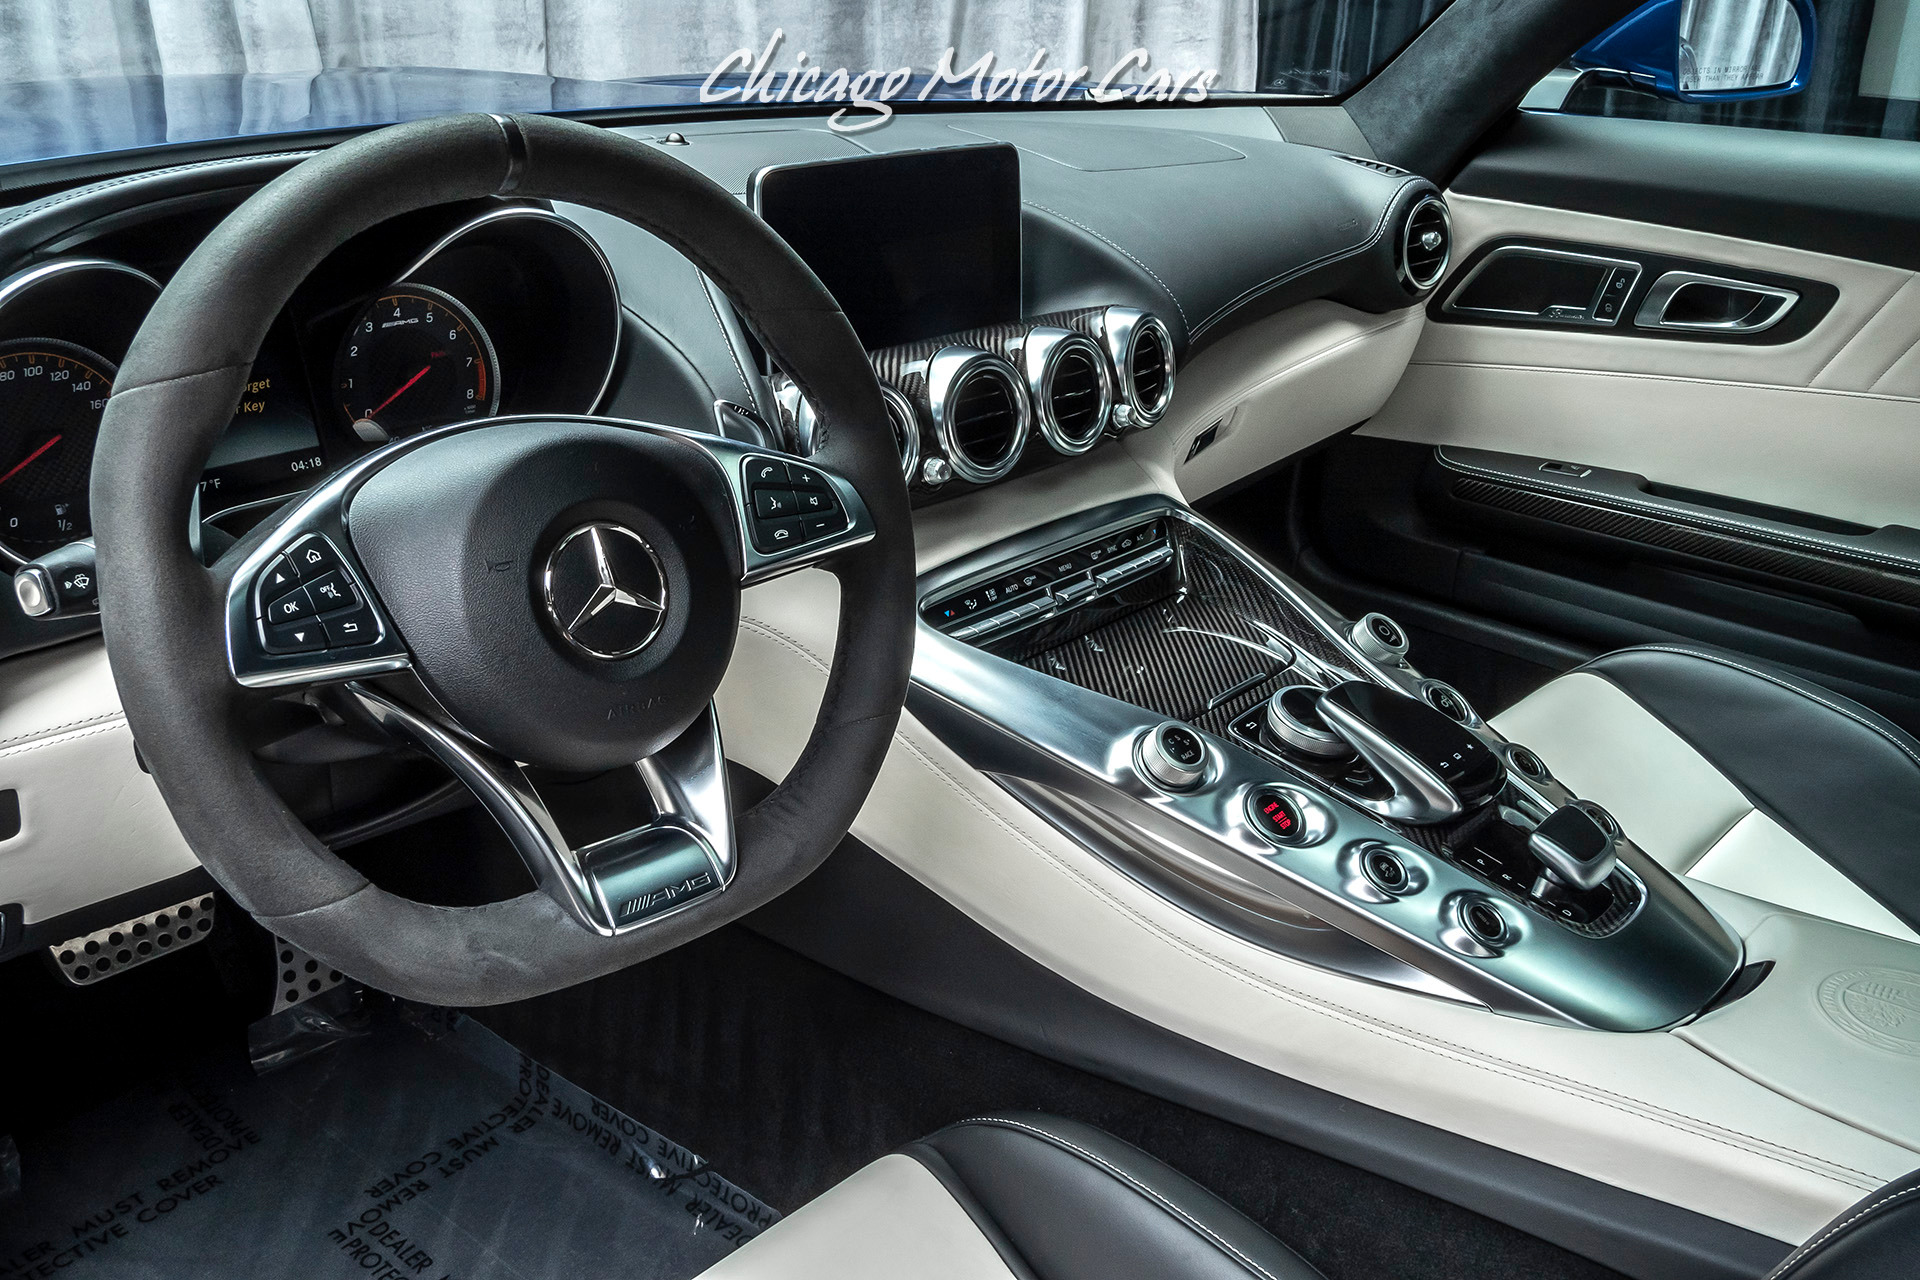 Used-2016-Mercedes-Benz-AMG-GTS-Coupe-MSRP-147700-EXCLUSIVE-INTERIOR-PACK